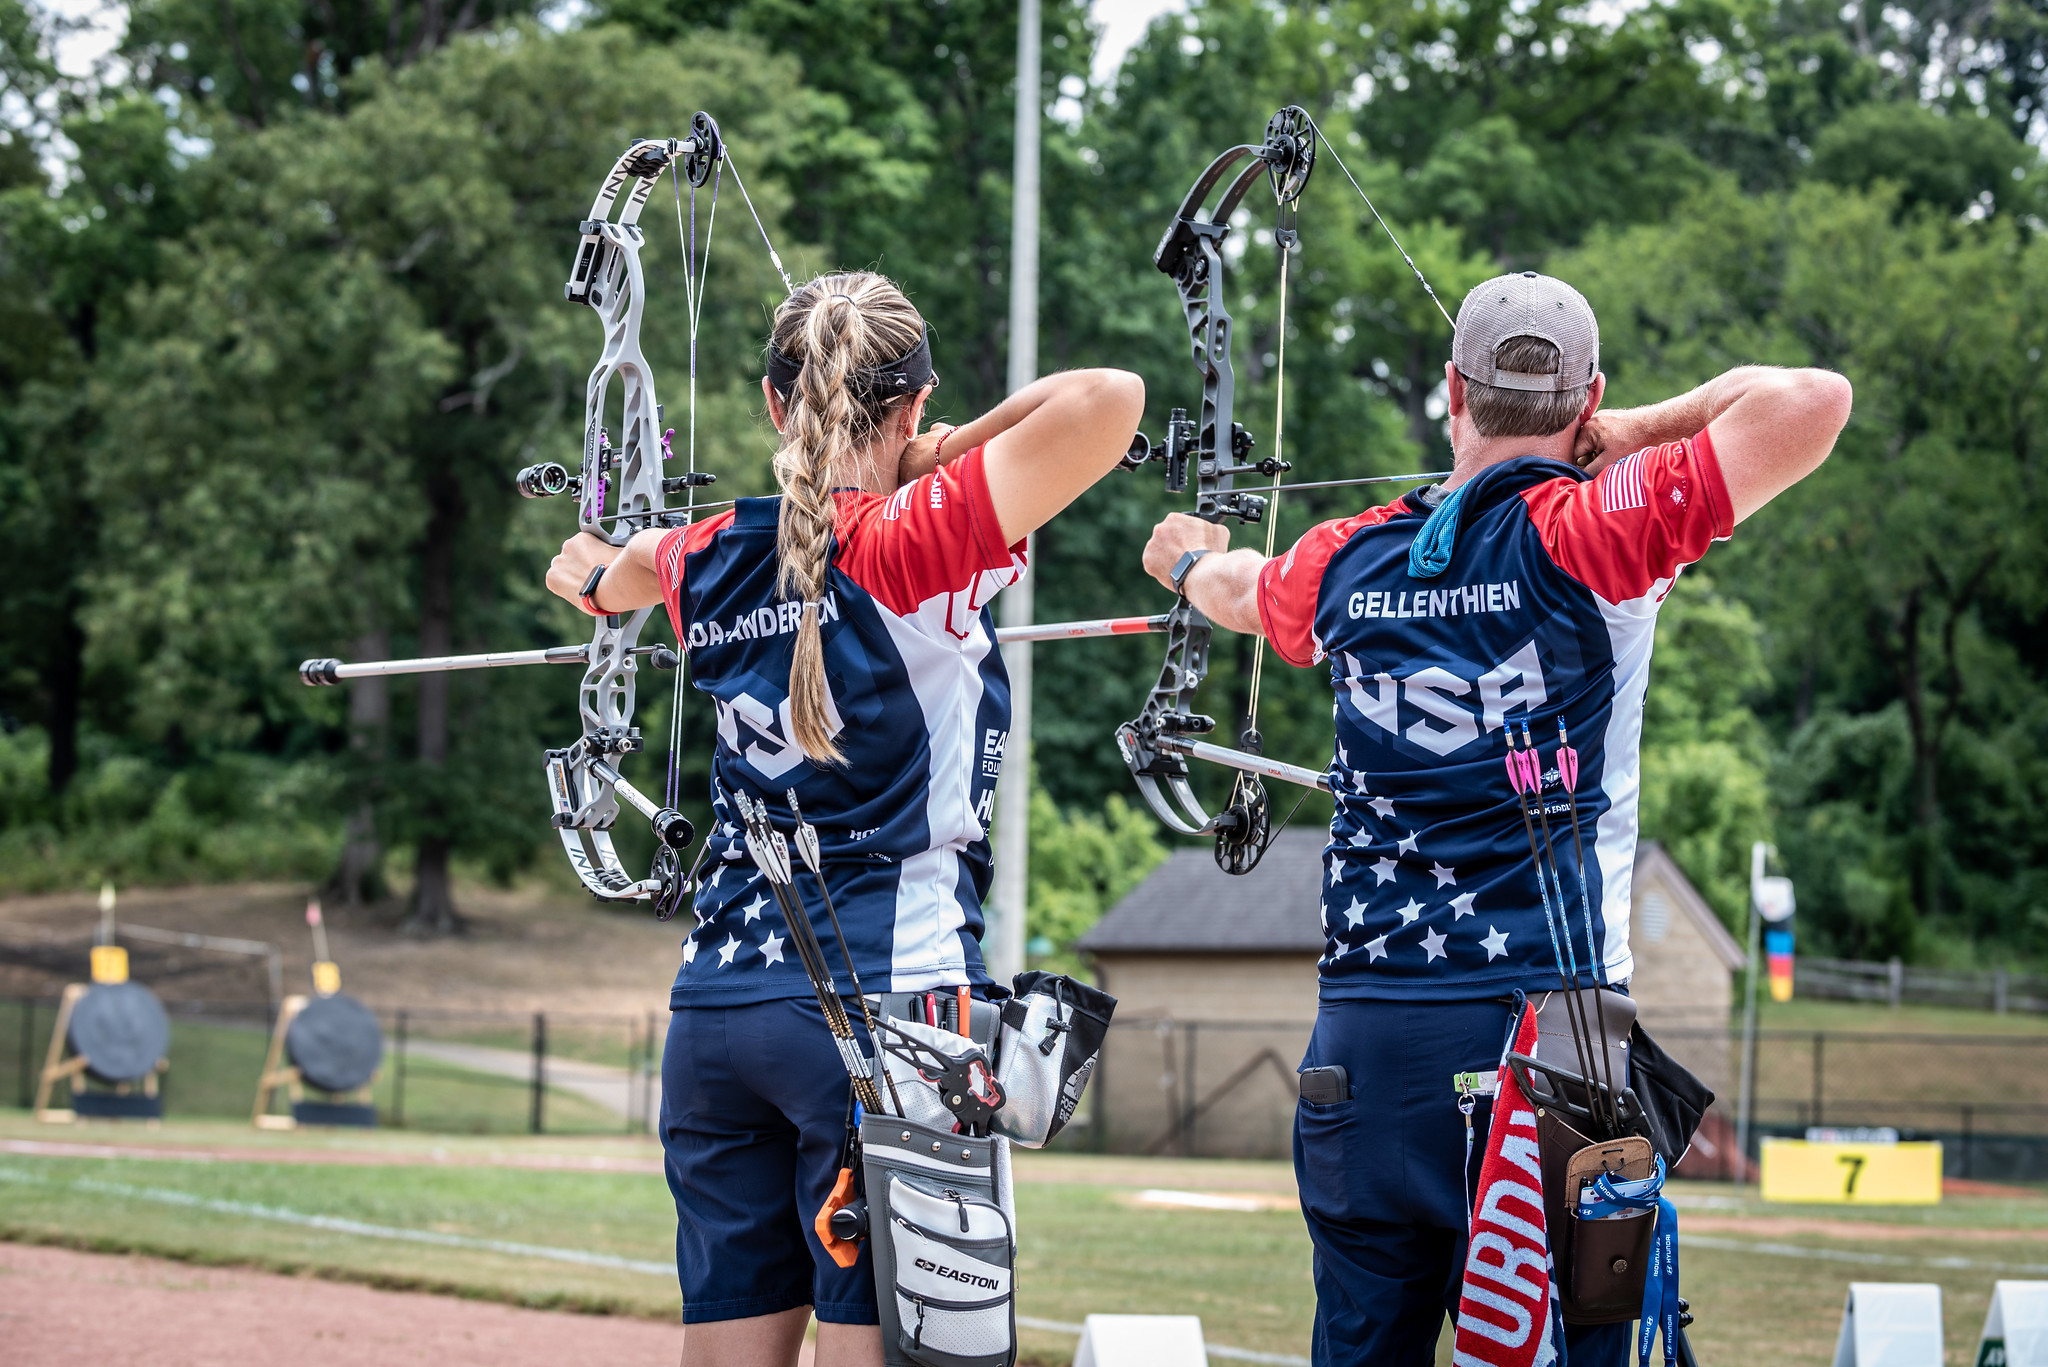 The United States fell to defeat in the mixed team compound quarterfinals match versus The Netherlands ©The World Games